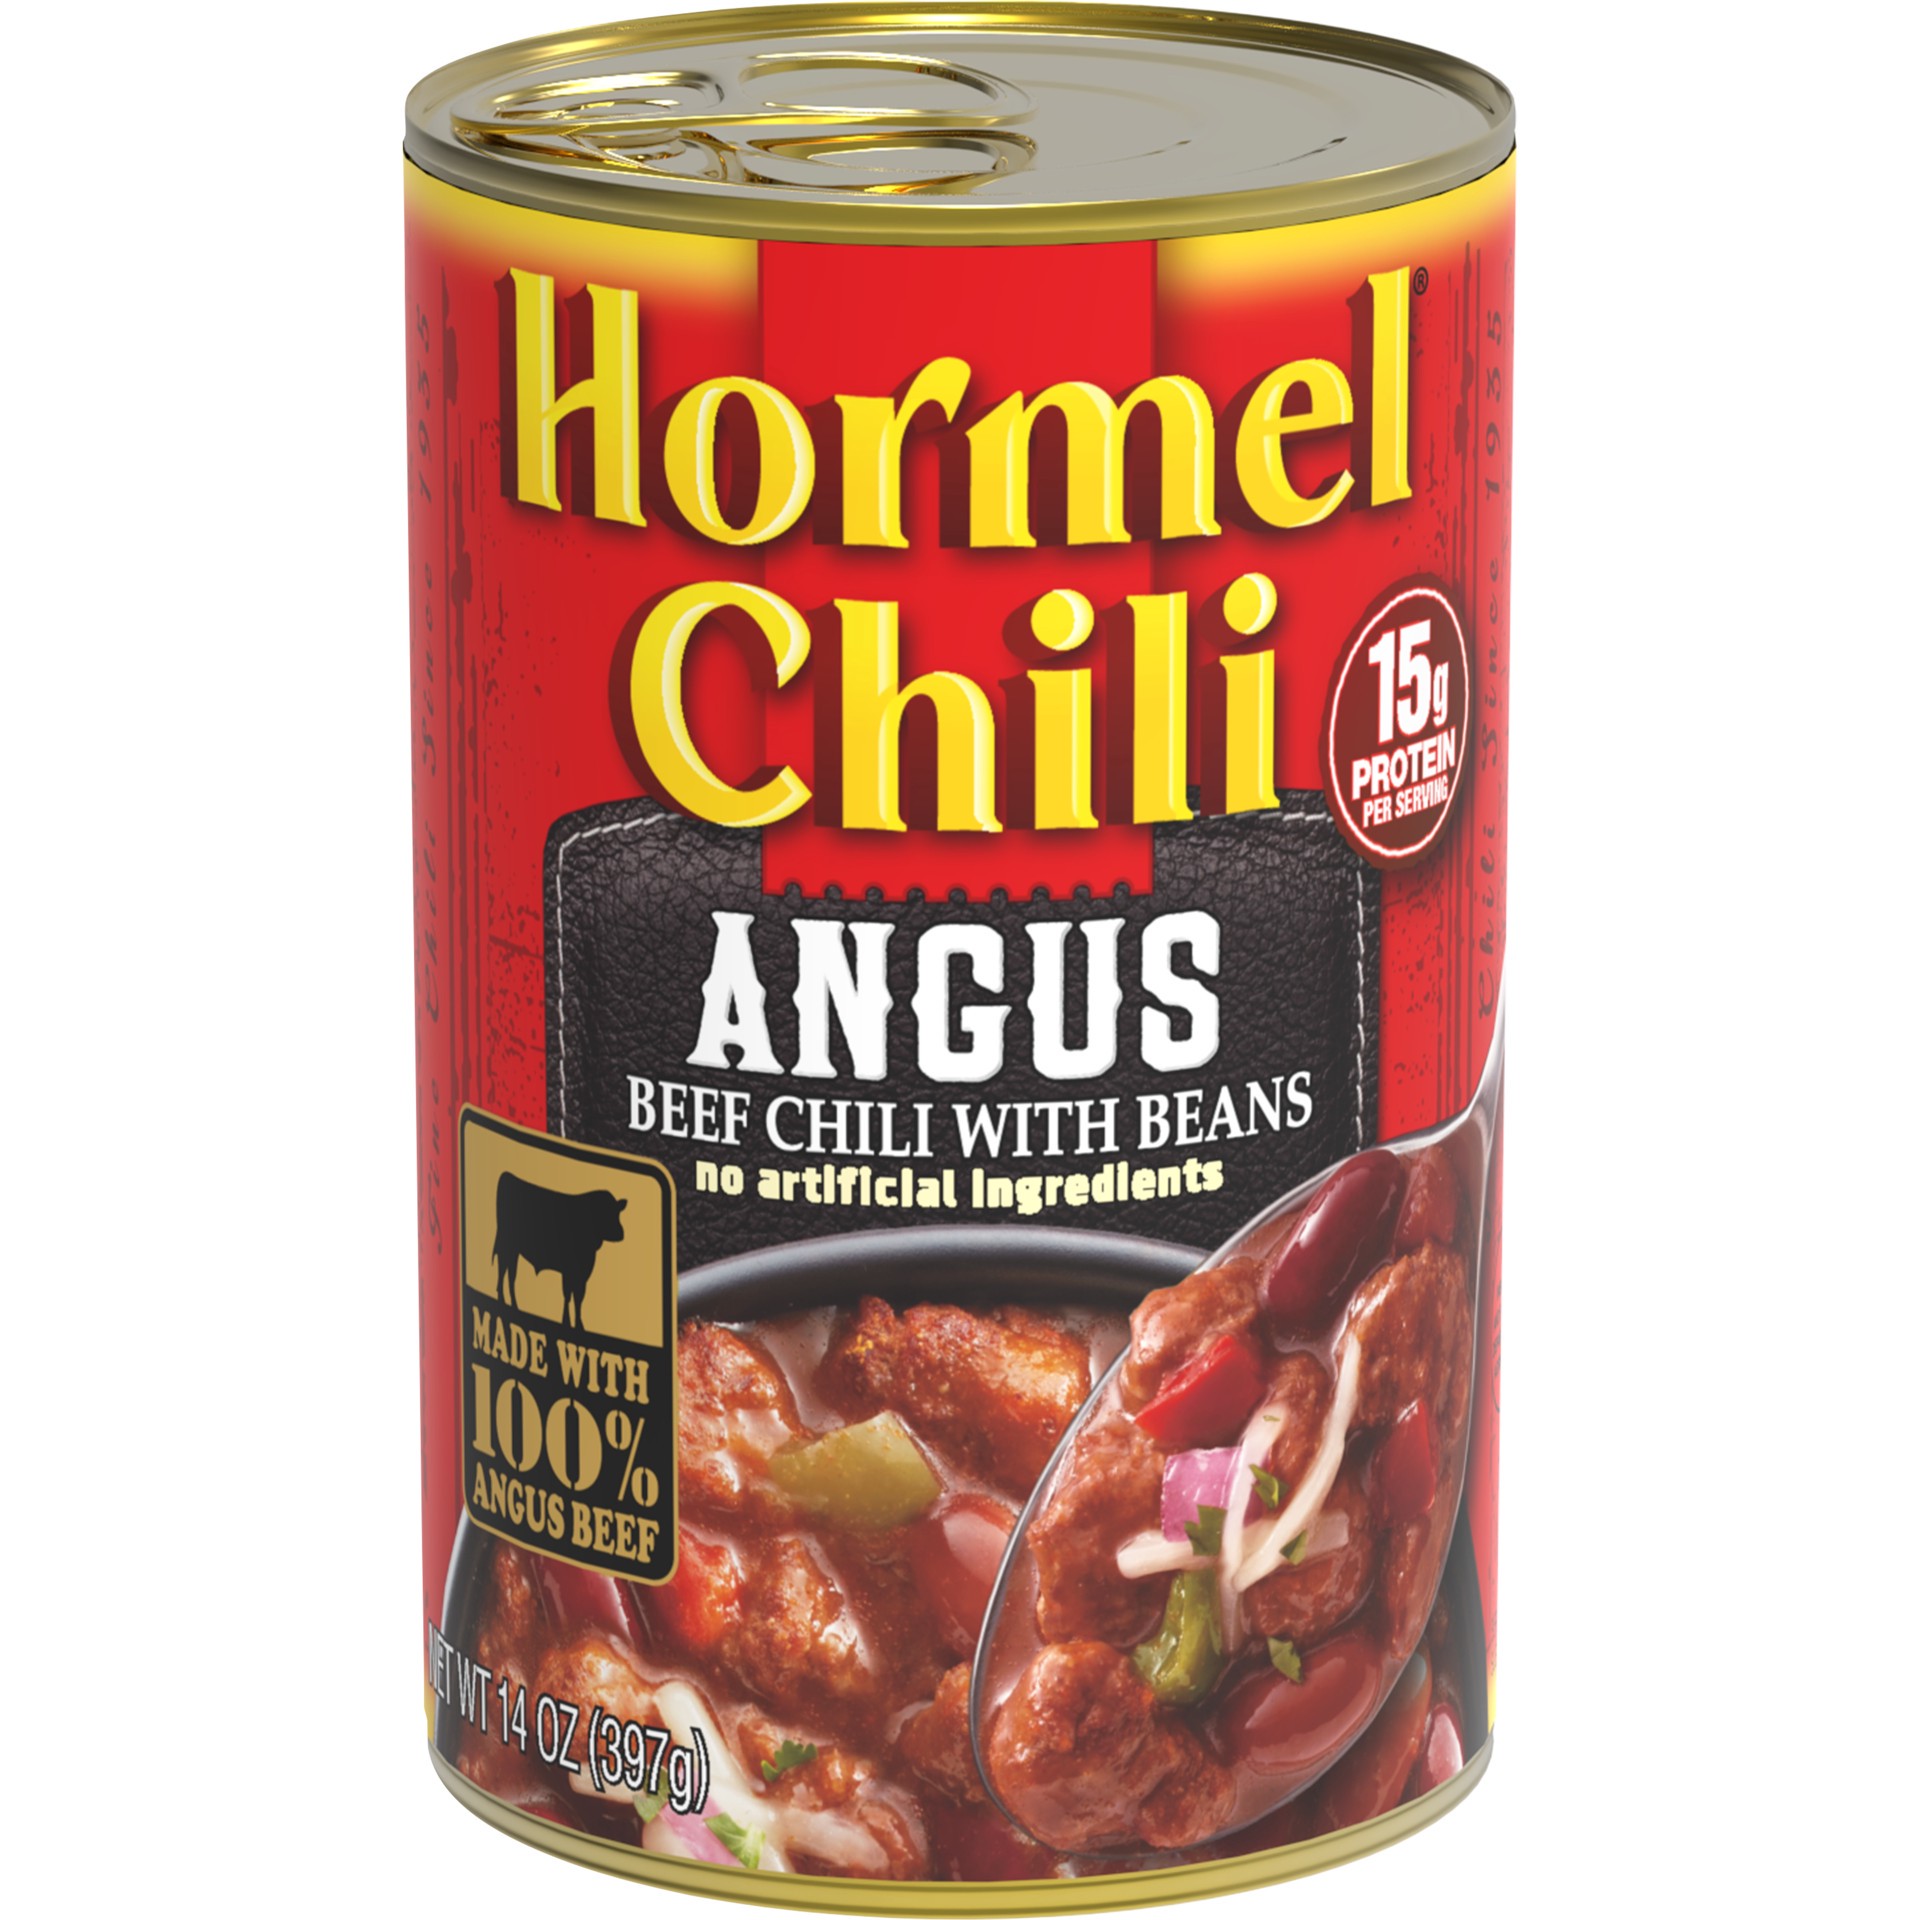 slide 1 of 1, Hormel Chili Angus Beef with Beans, 14 oz